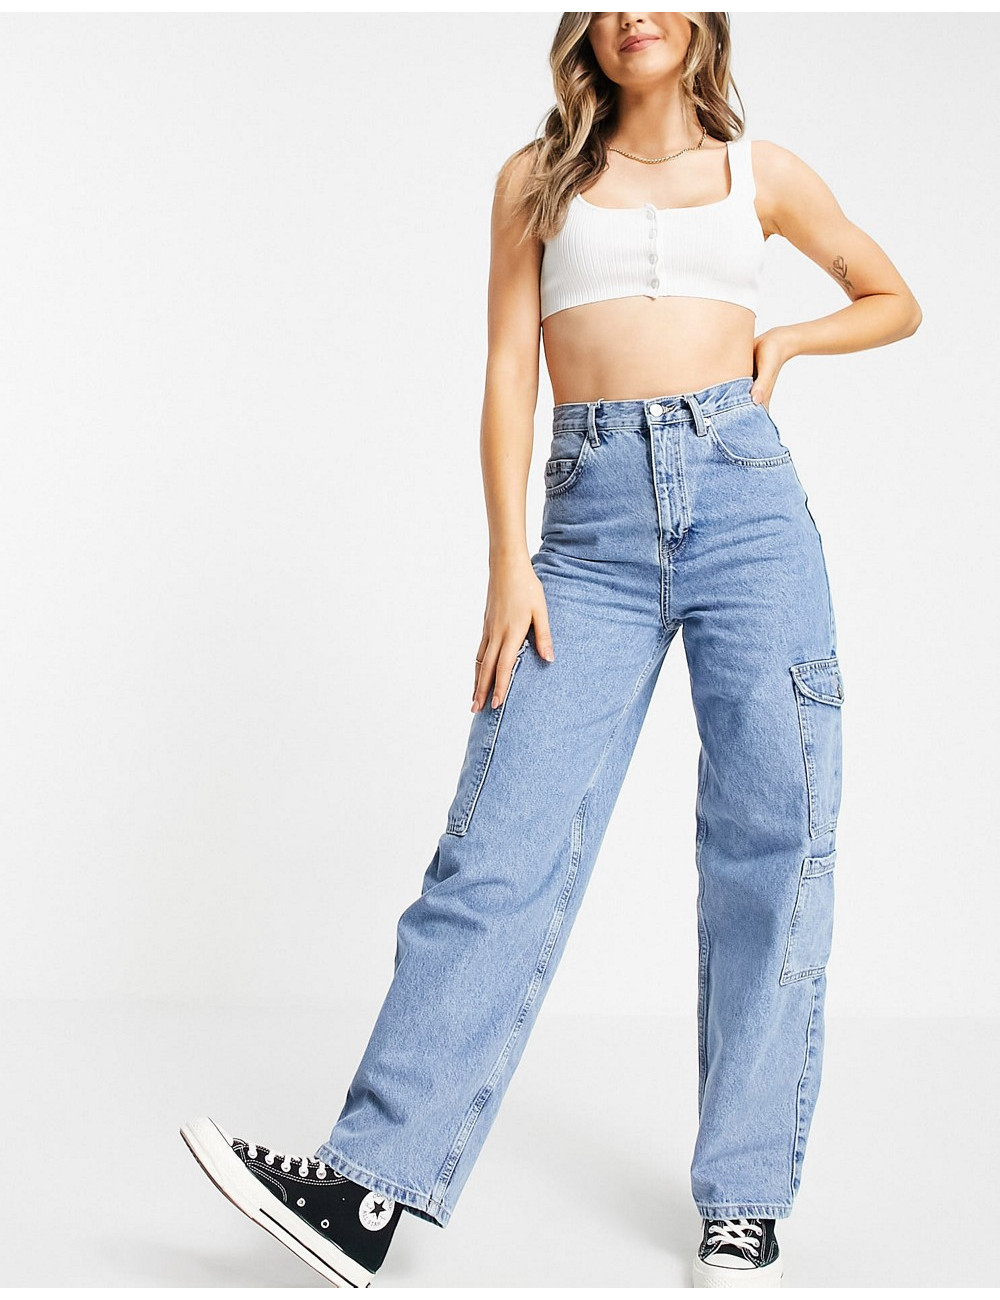 Topshop utility baggy jeans...